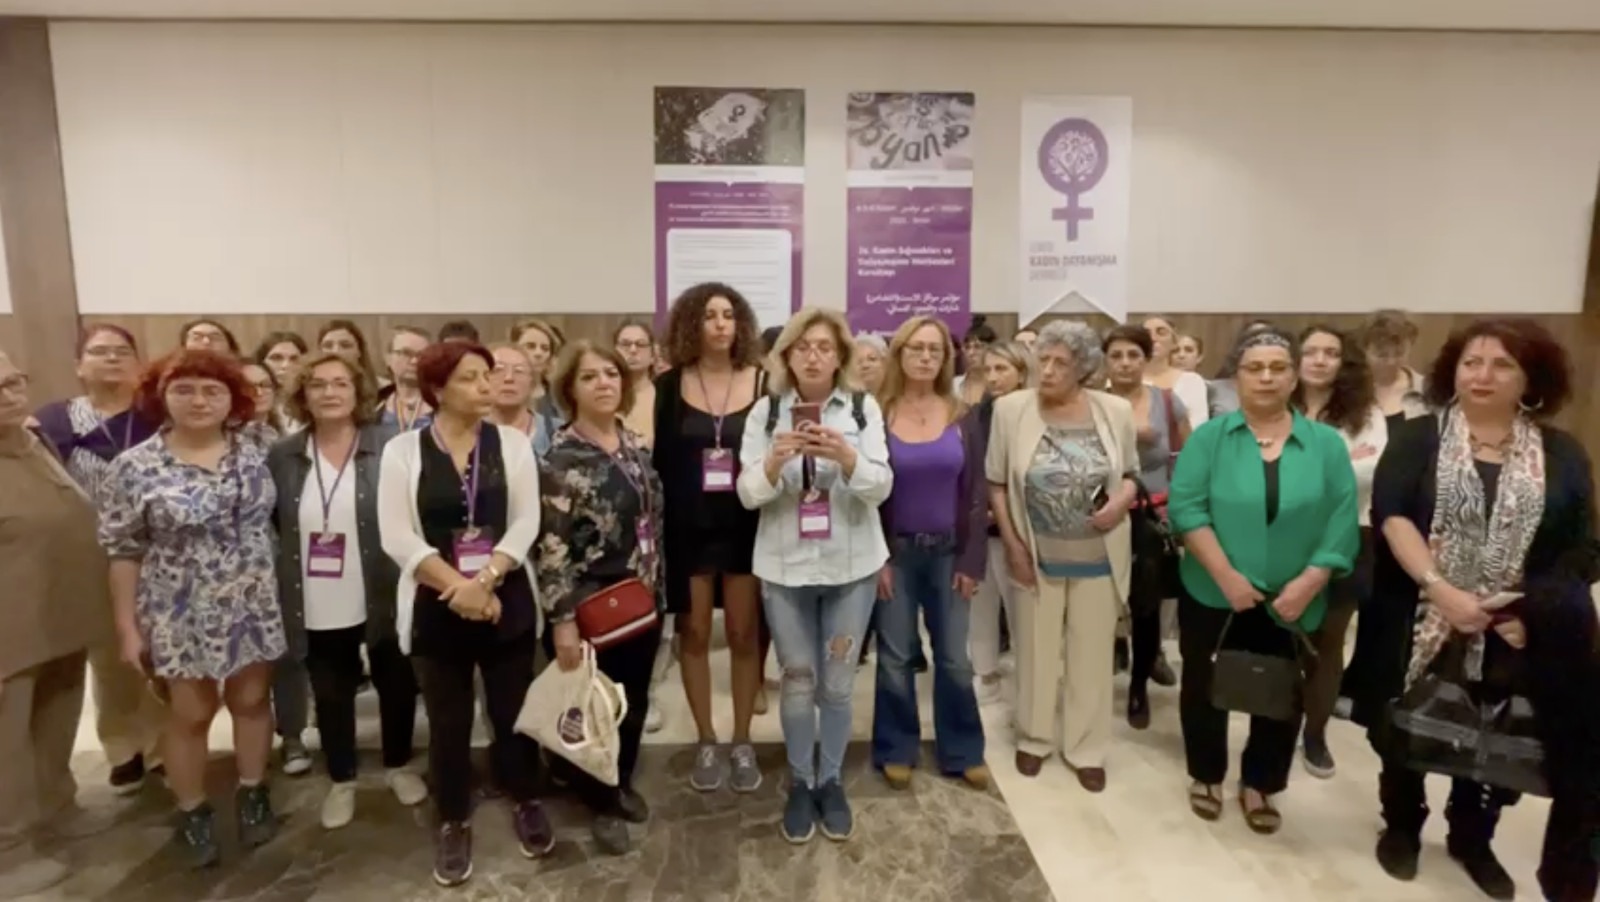 Solidarity with Hande Buse Şeker from Shelters Assemblies | Kaos GL - News Portal for LGBTI+ News